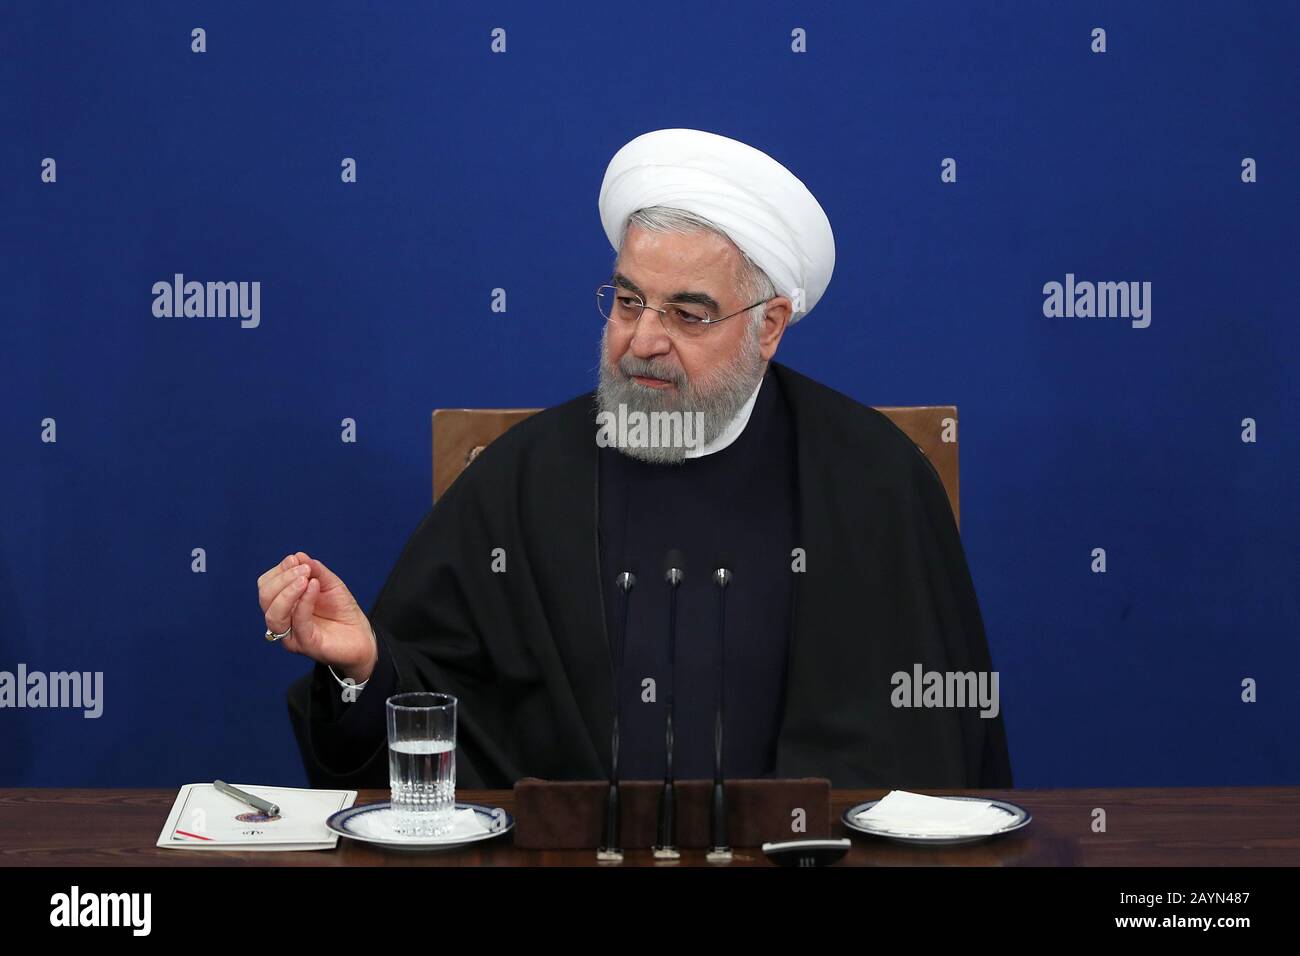 Tehran, Iran. 16th Feb, 2020. A handout picture provided by the Iranian presidency on February 16, 2020, shows Iranian President HASSAN ROUHANI speaks during a news conference in the capital Tehran. Rouhani appeared in a press conference with domestic and international media outlets and spoke about the most important domestic issues, as well as the positions of the Islamic Republic of Iran regarding regional and international issues. Rouhani said: Tehran will not negotiate with the United States under pressure, Washington must first lift the sanctions and reinstate its commitment to the Joi Stock Photo